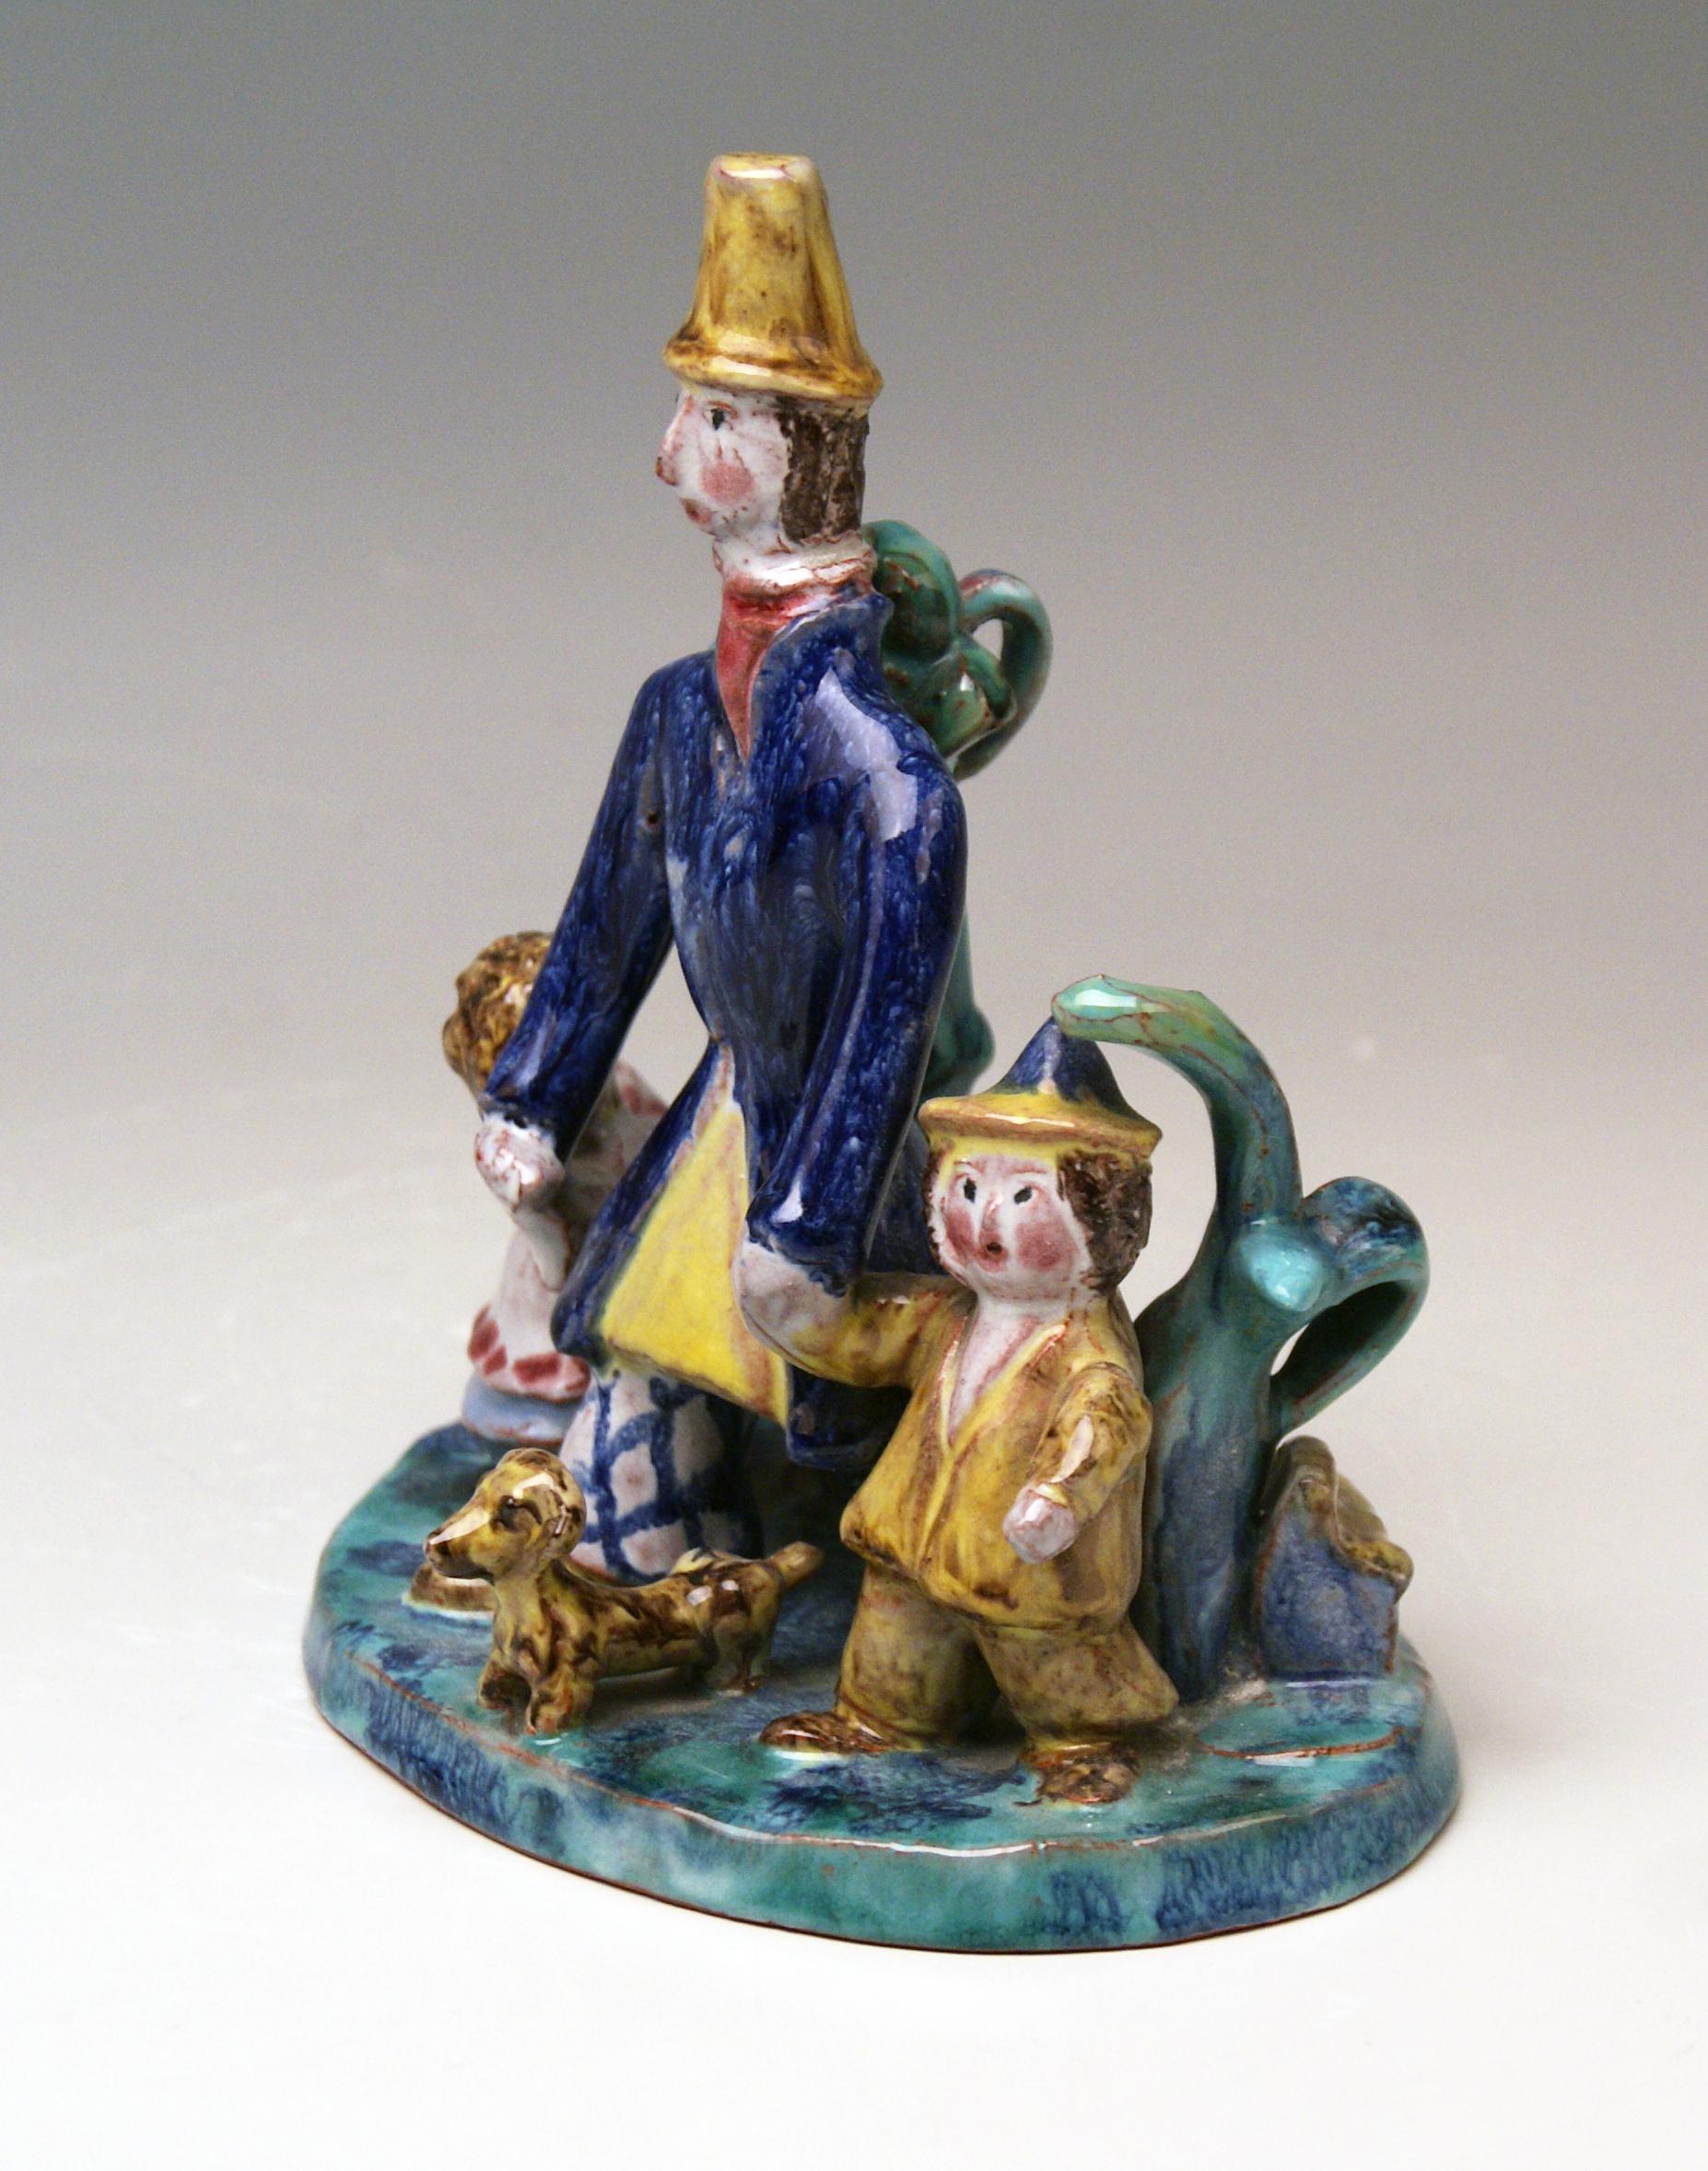 Austrian lovely ceramics figurines 'Pleasant Walk' deriving from Wiener Werkstaette, designed by 
Susi Singer (1895 1965) circa 1920.
Made circa 1921

Excellently manufactured ceramics item of most lovely shape:
A male figurine, it is the